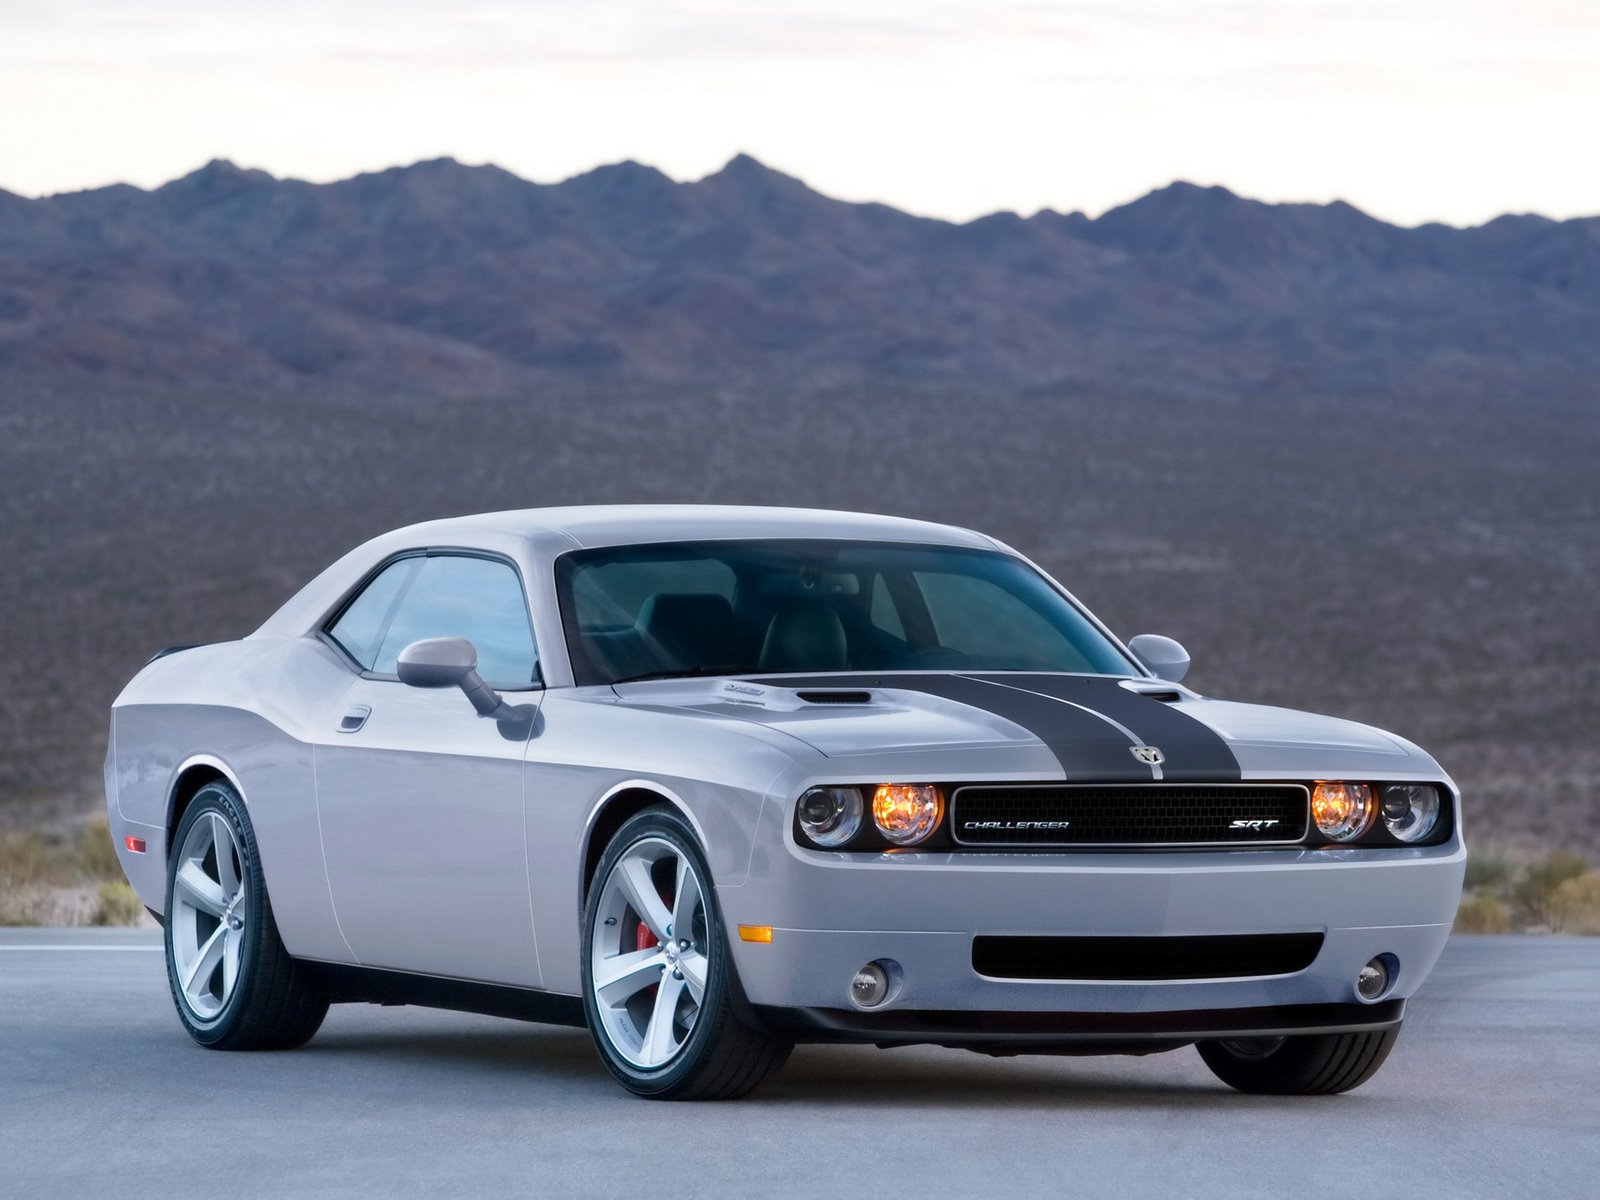 Dodge Challenger Srt8 Car Re With Pictures And Wallpaper